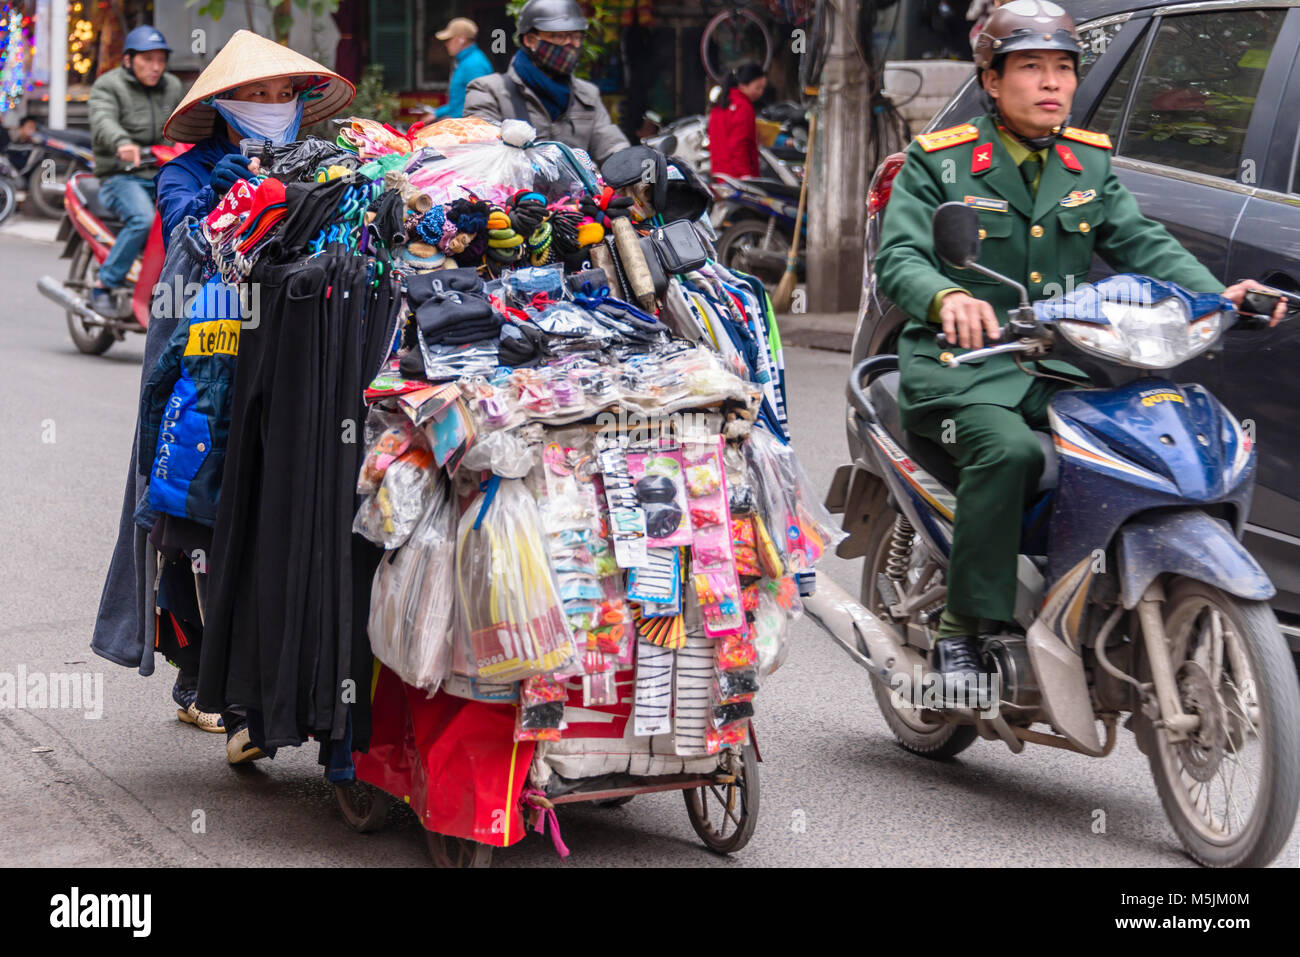 A Vietnamese woman wearing a bamboo hat and face mask, pushes a handcart full of household items for sale in Hanoi, Vietnam. Stock Photo